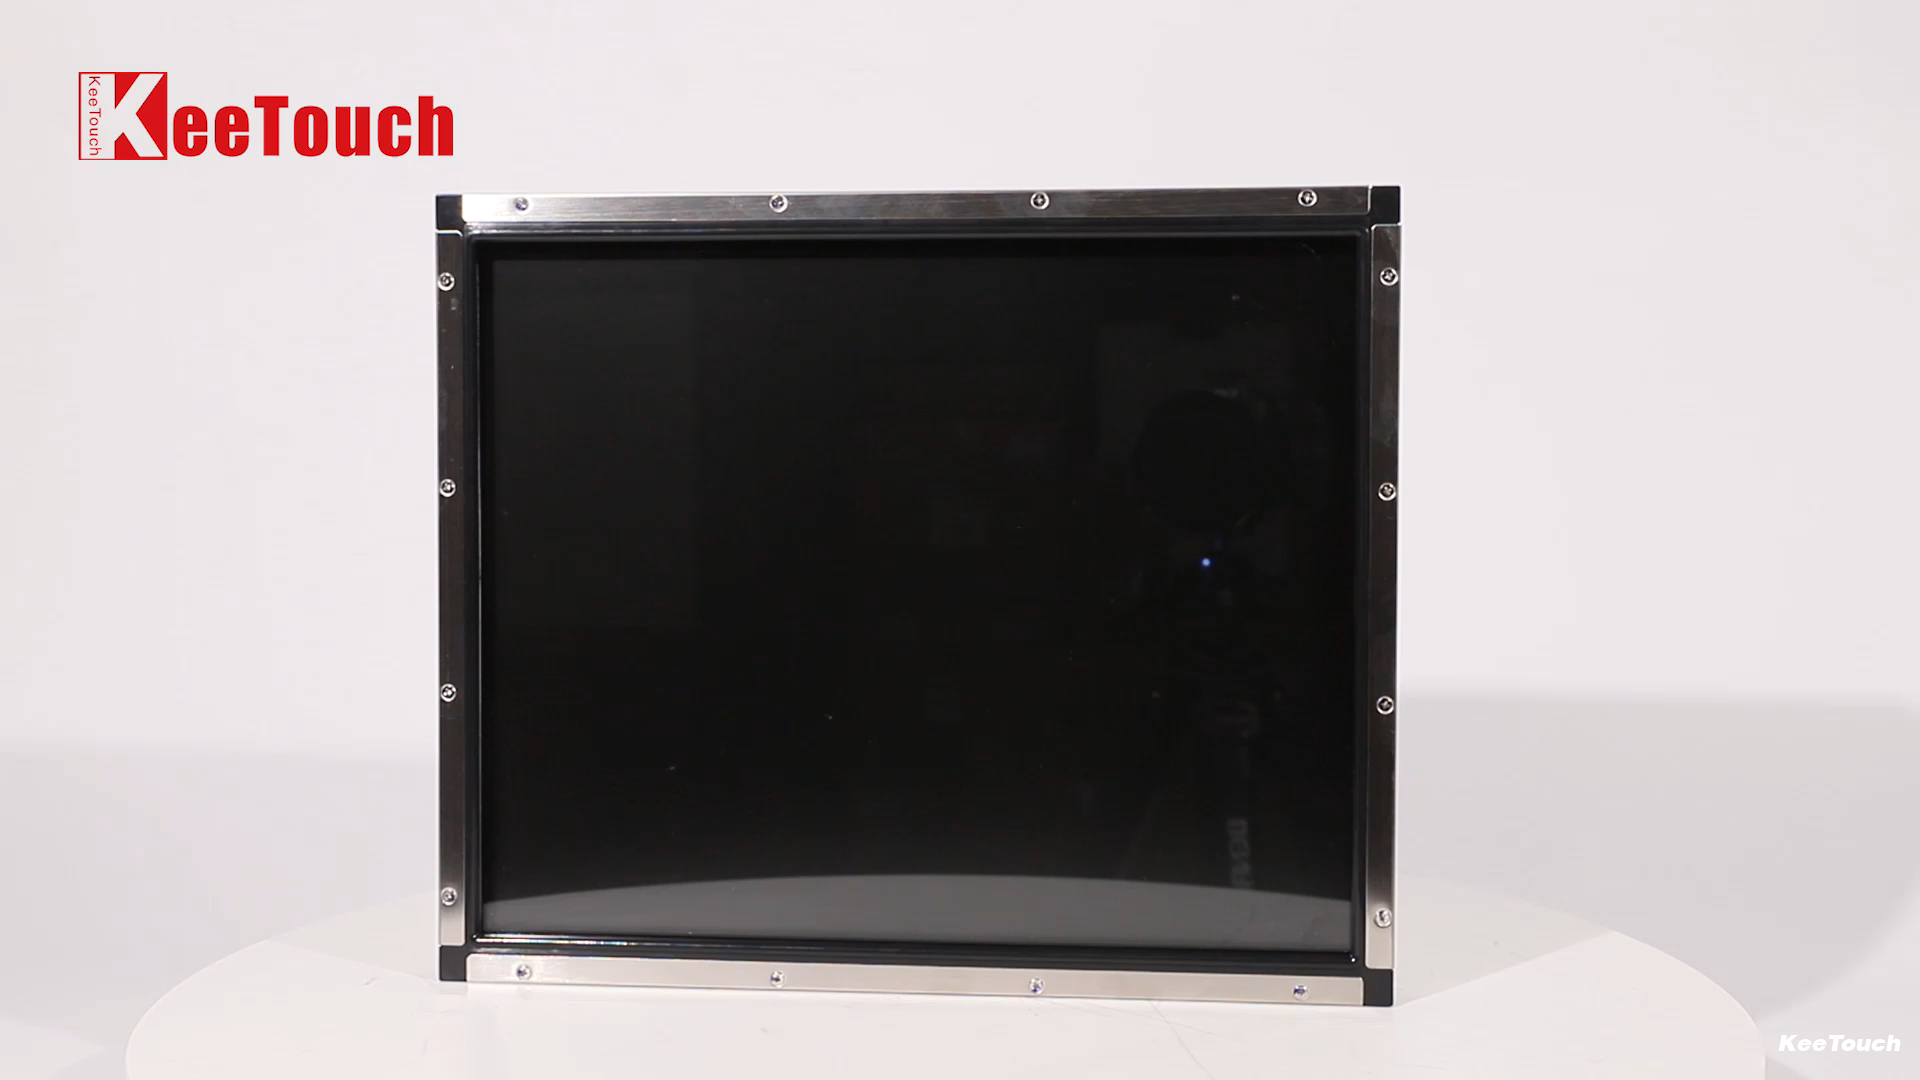 Embedded LCD Interactive Touch Monitor 17 Inch 1280×1024 Resolution